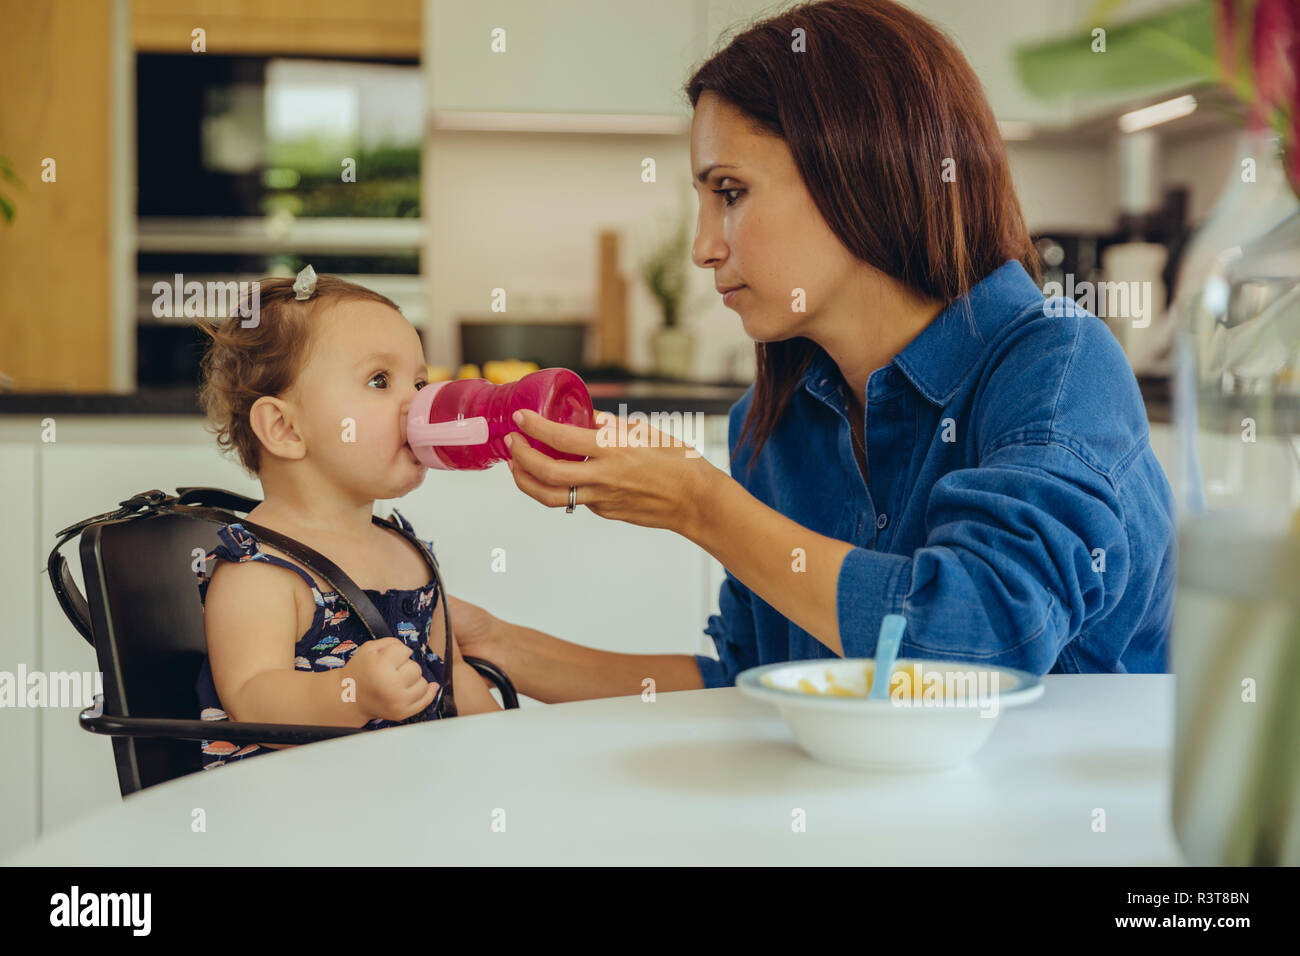 Mother helping baby daughter drinking water from bottle in kitchen Stock Photo